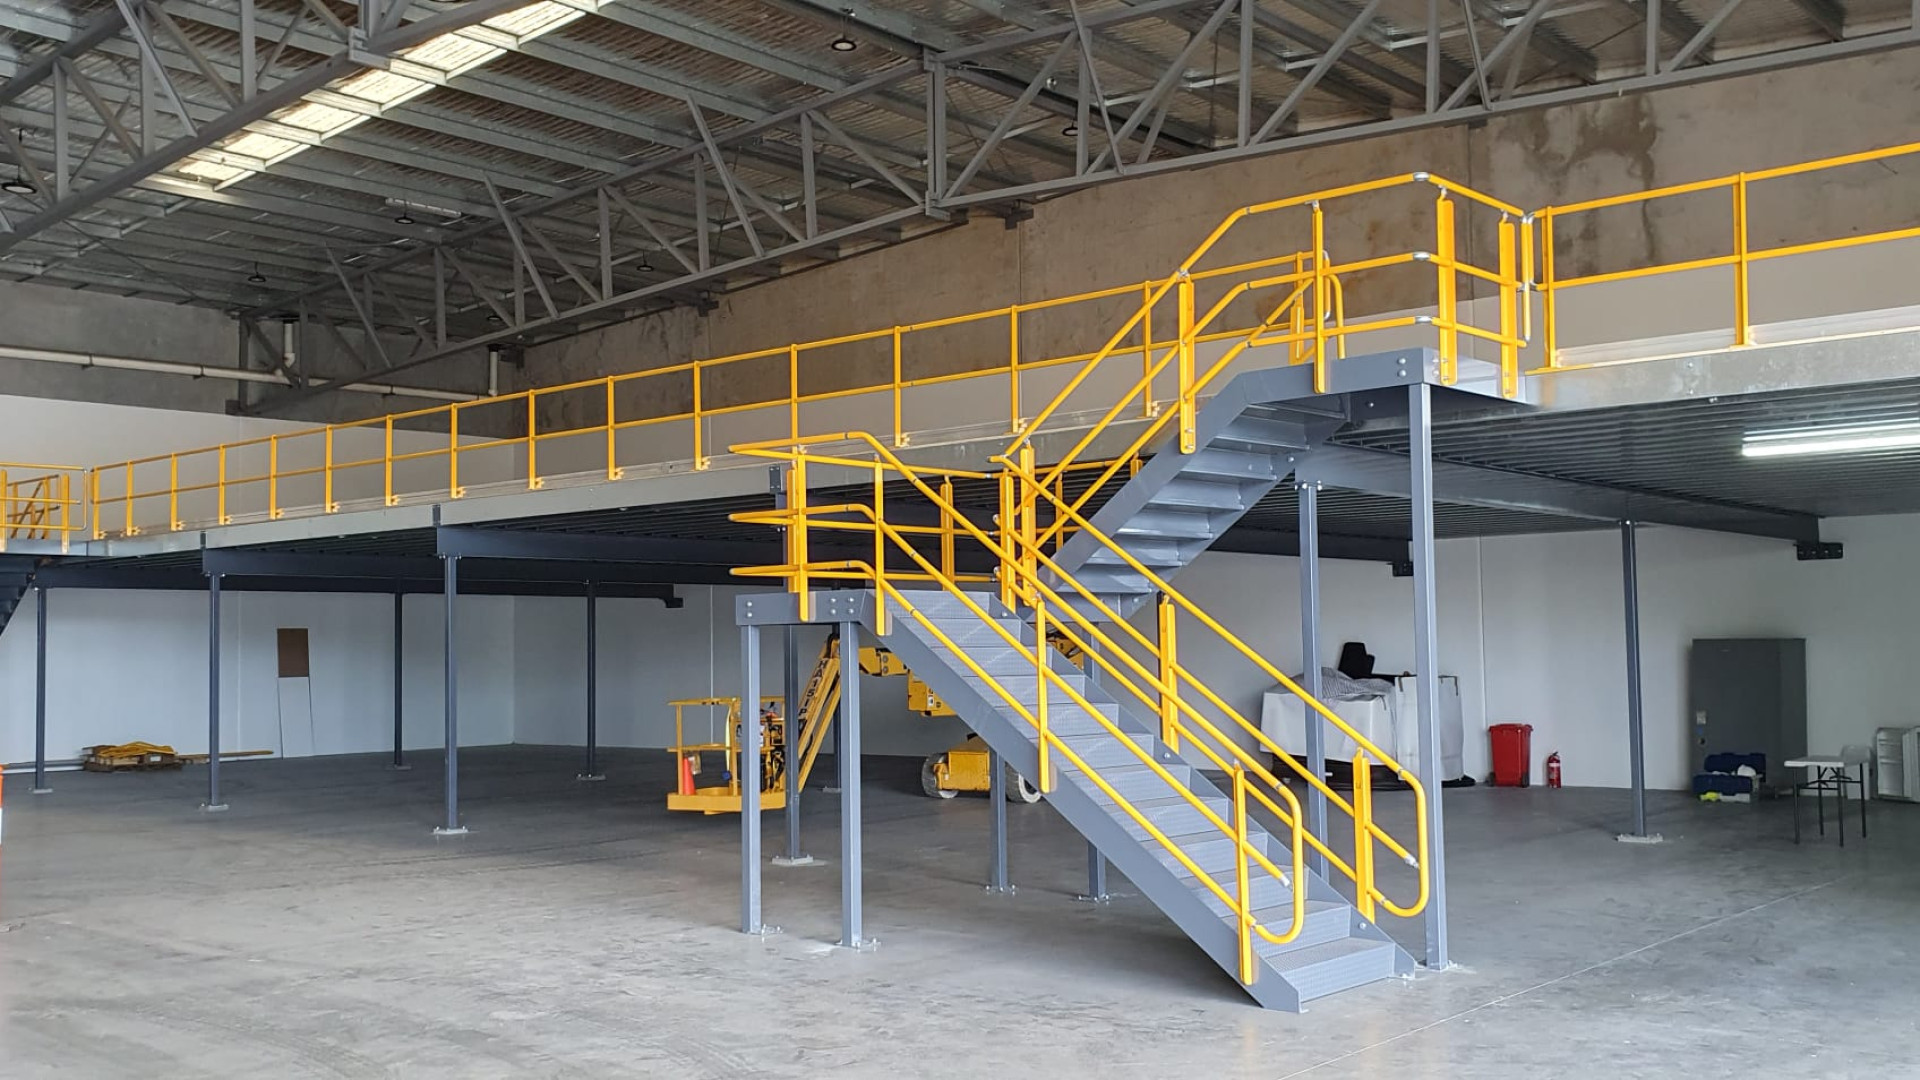 How Much Does A Mezzanine Floor Cost?